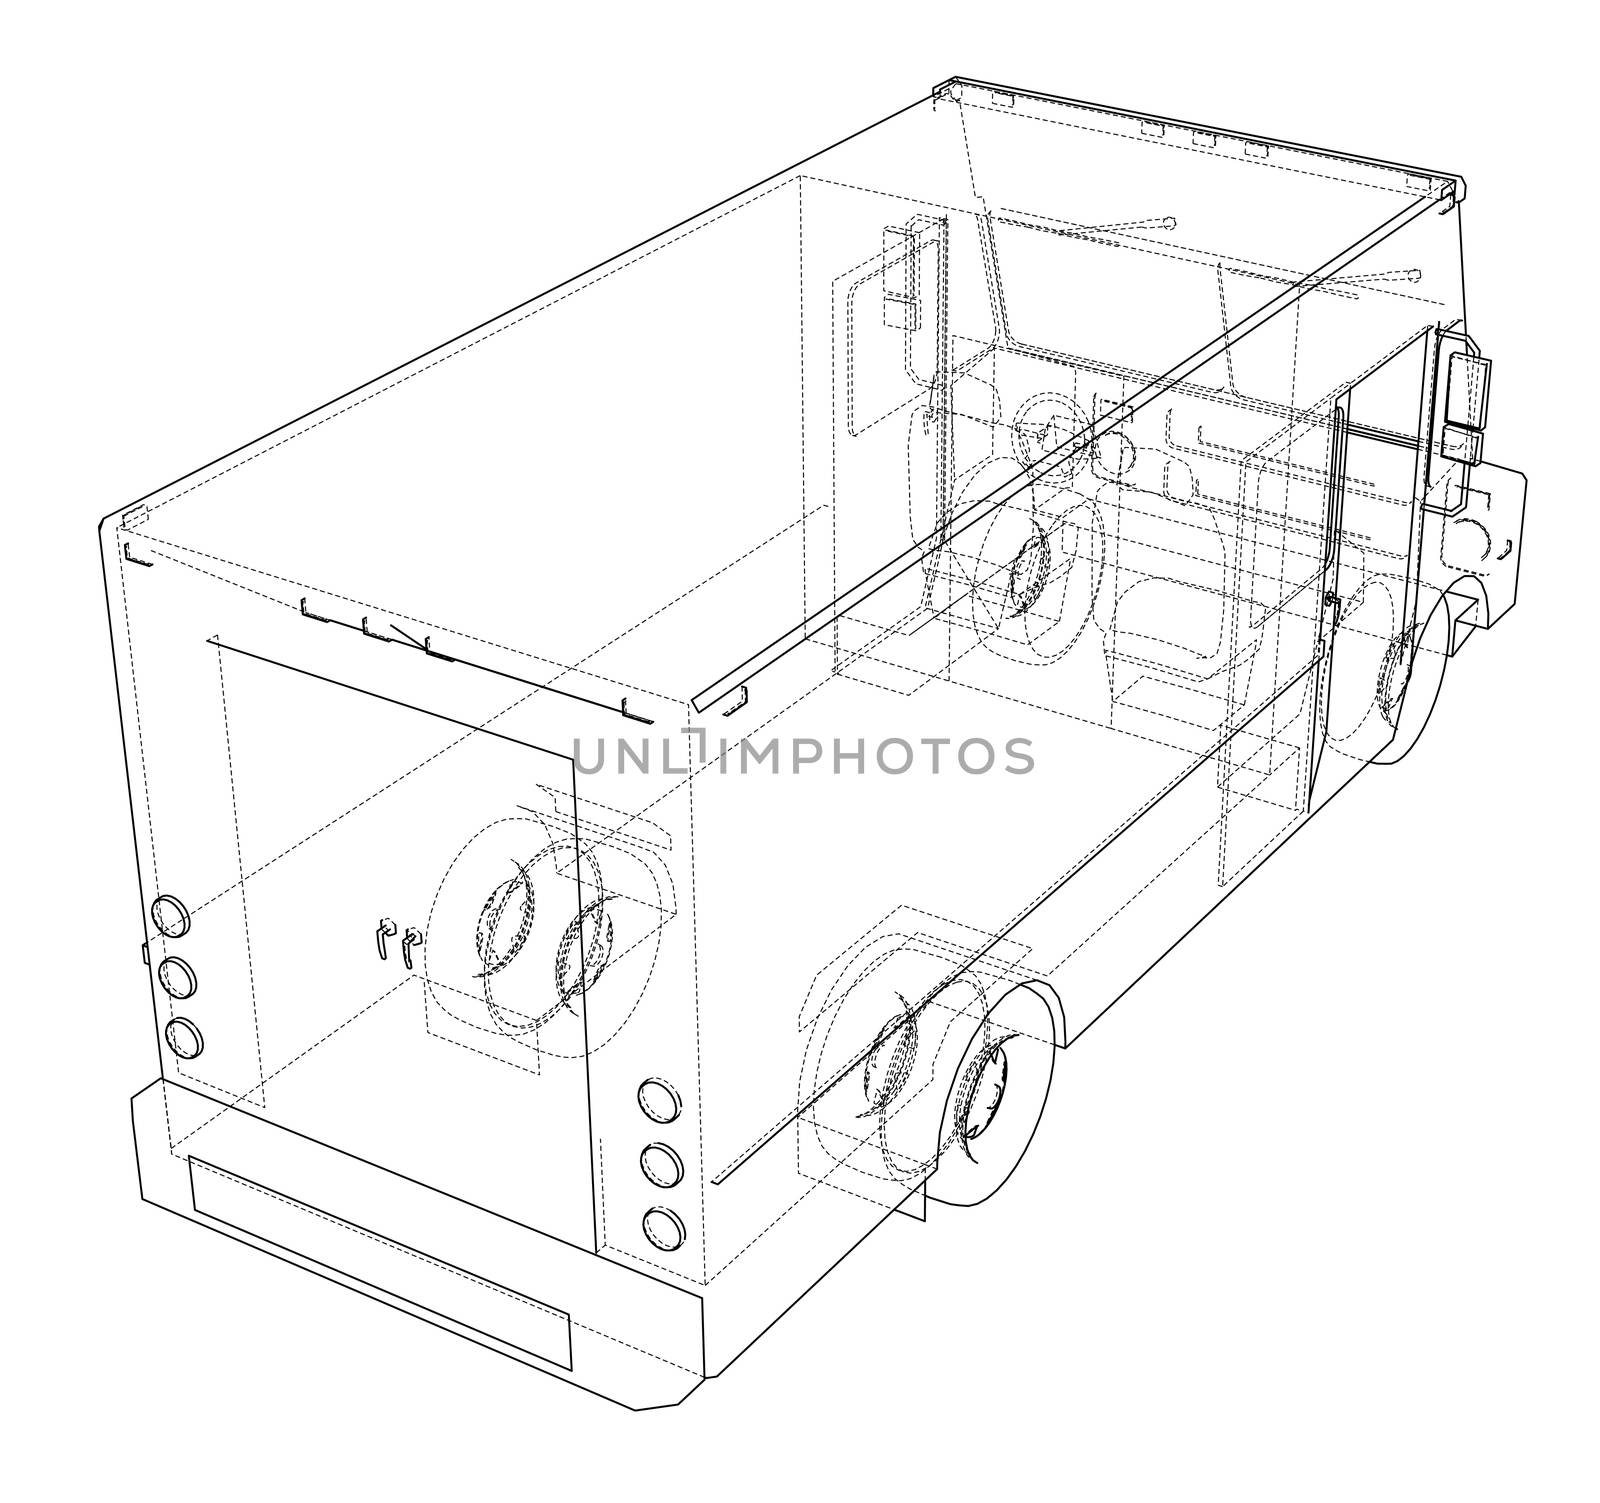 Concept delivery car. 3d illustration. Wire-frame style